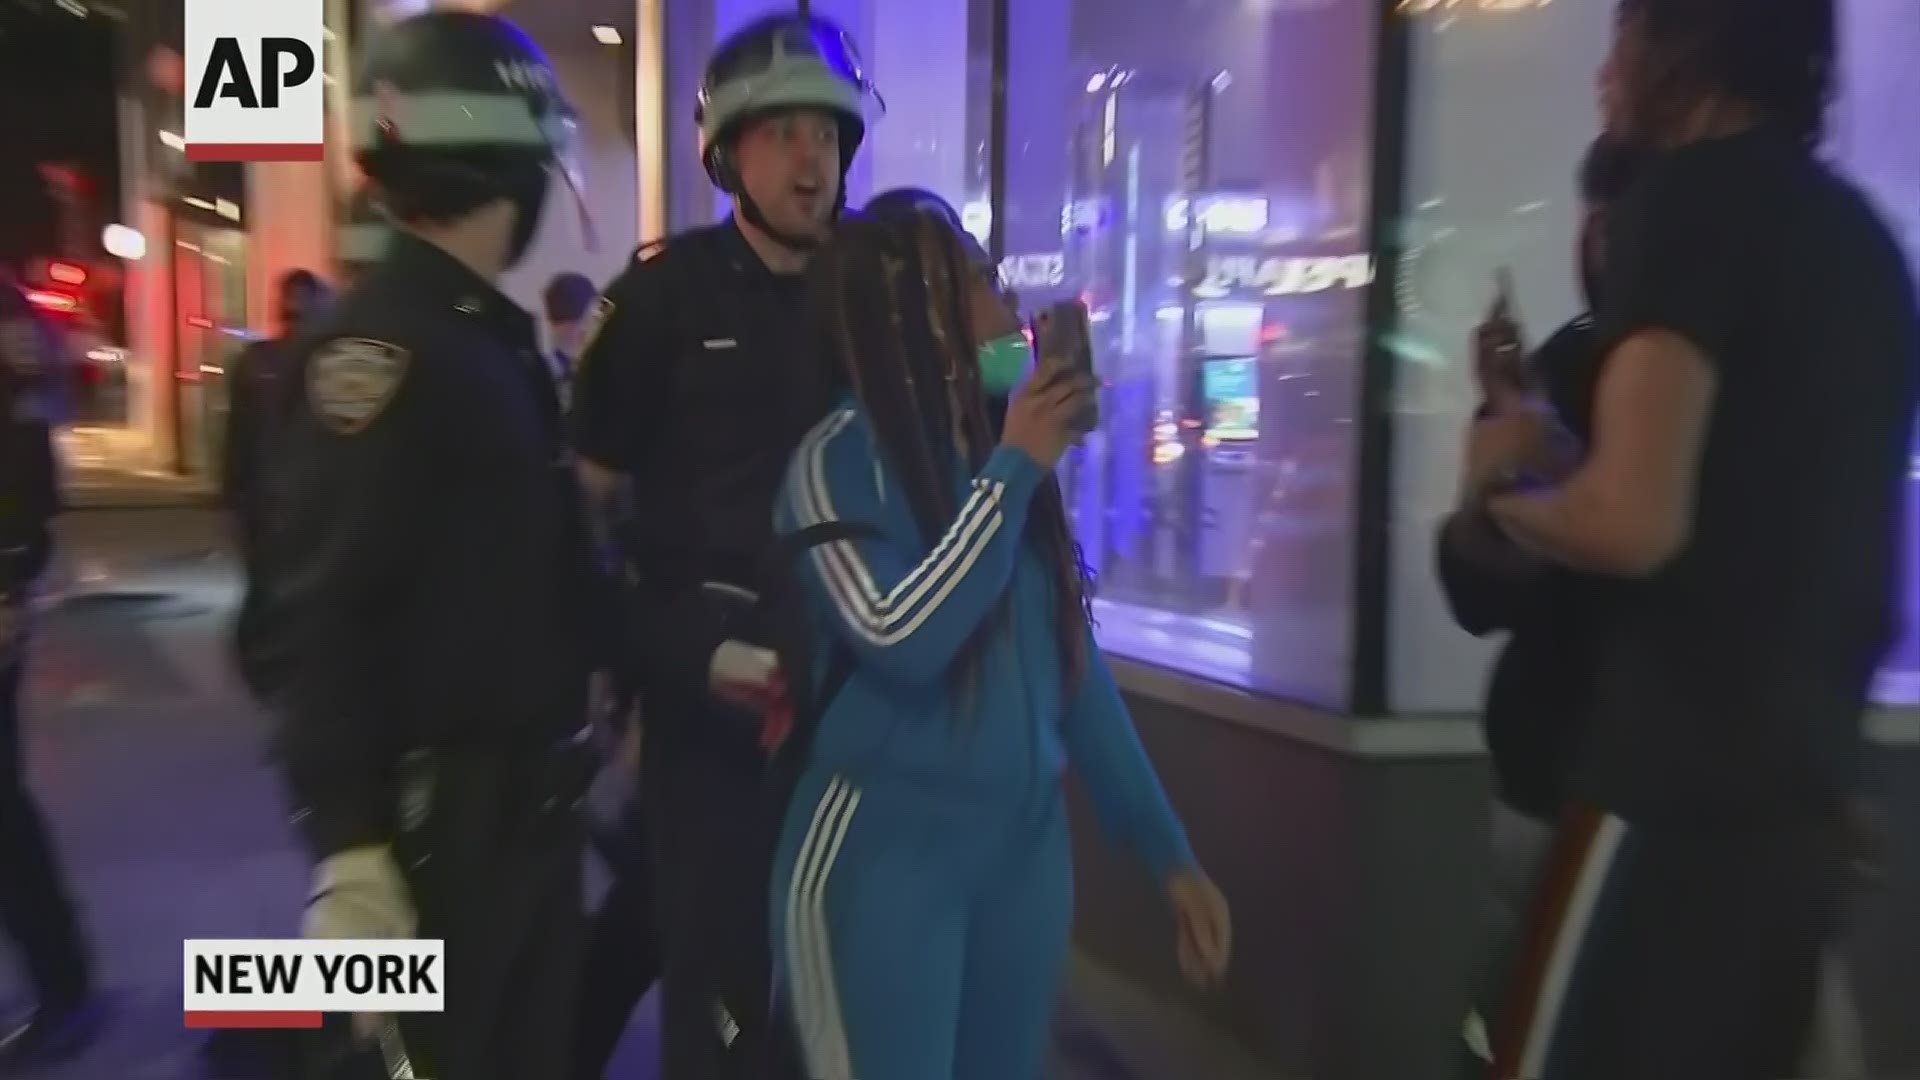 A video shows more than a half dozen officers confronting the journalists as they filmed police ordering protesters to go home shortly after curfew. (Via AP)